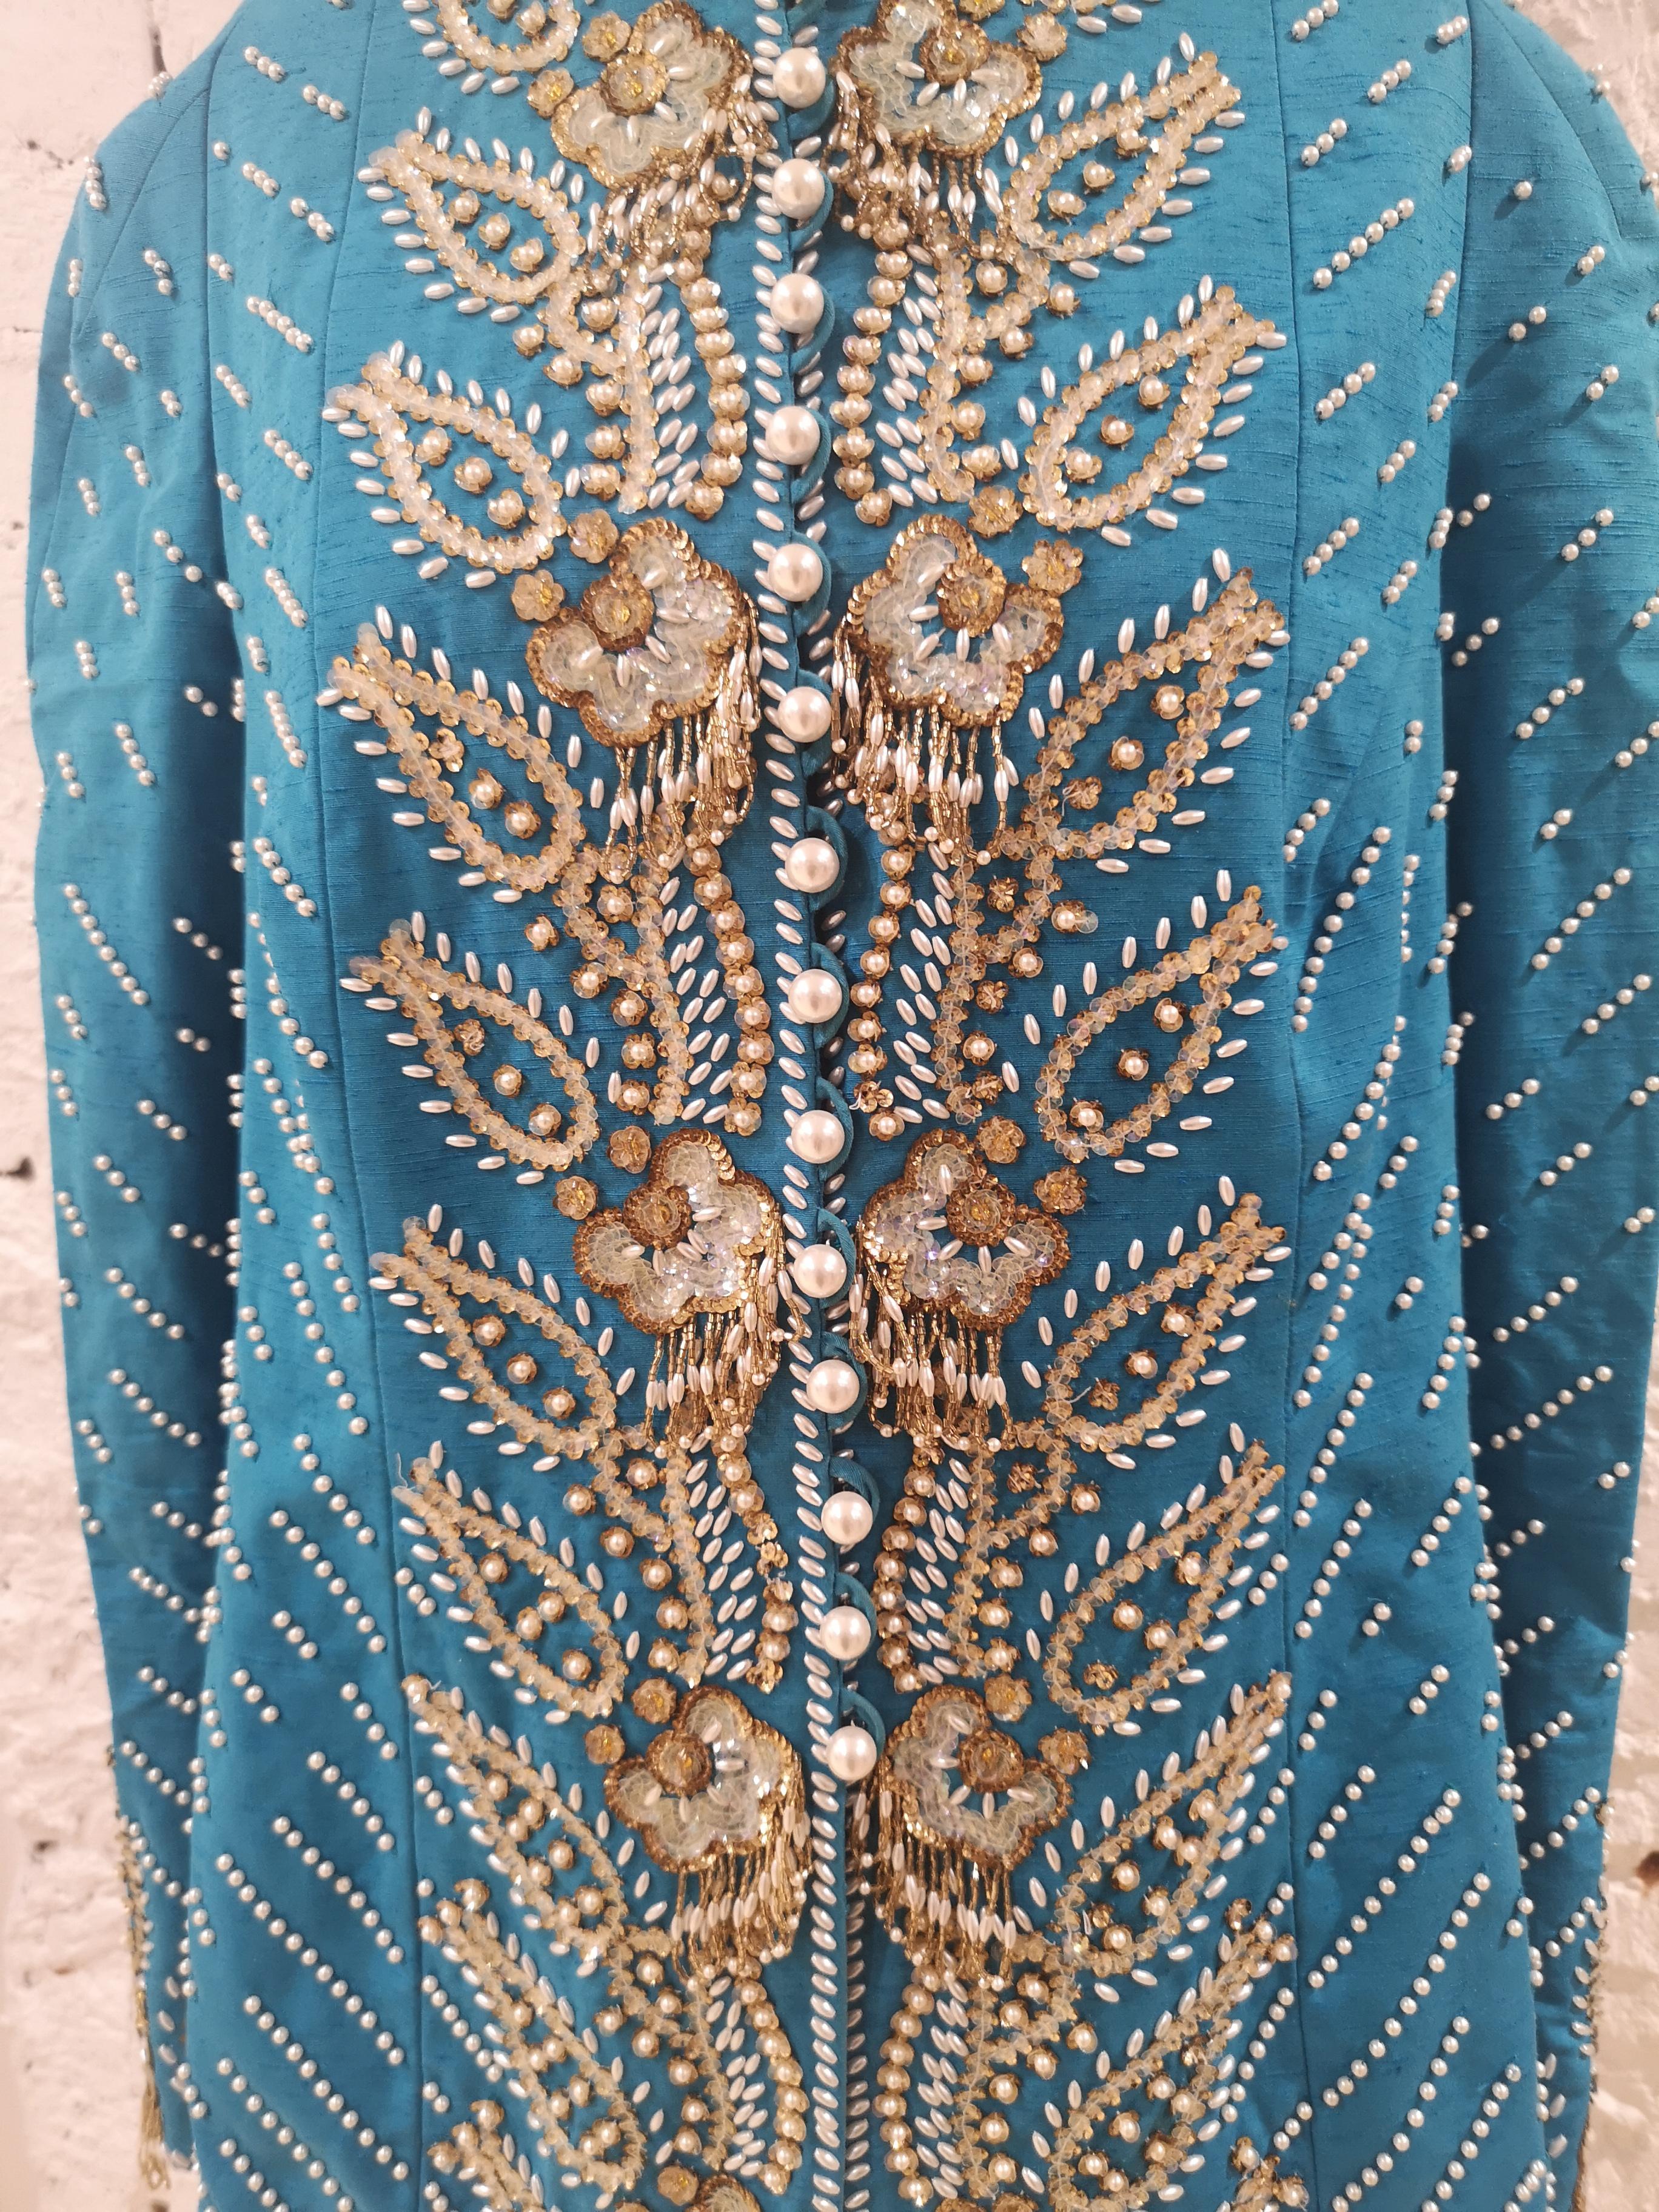 Christian Dior turquoise pearls beads sequins jacket 1